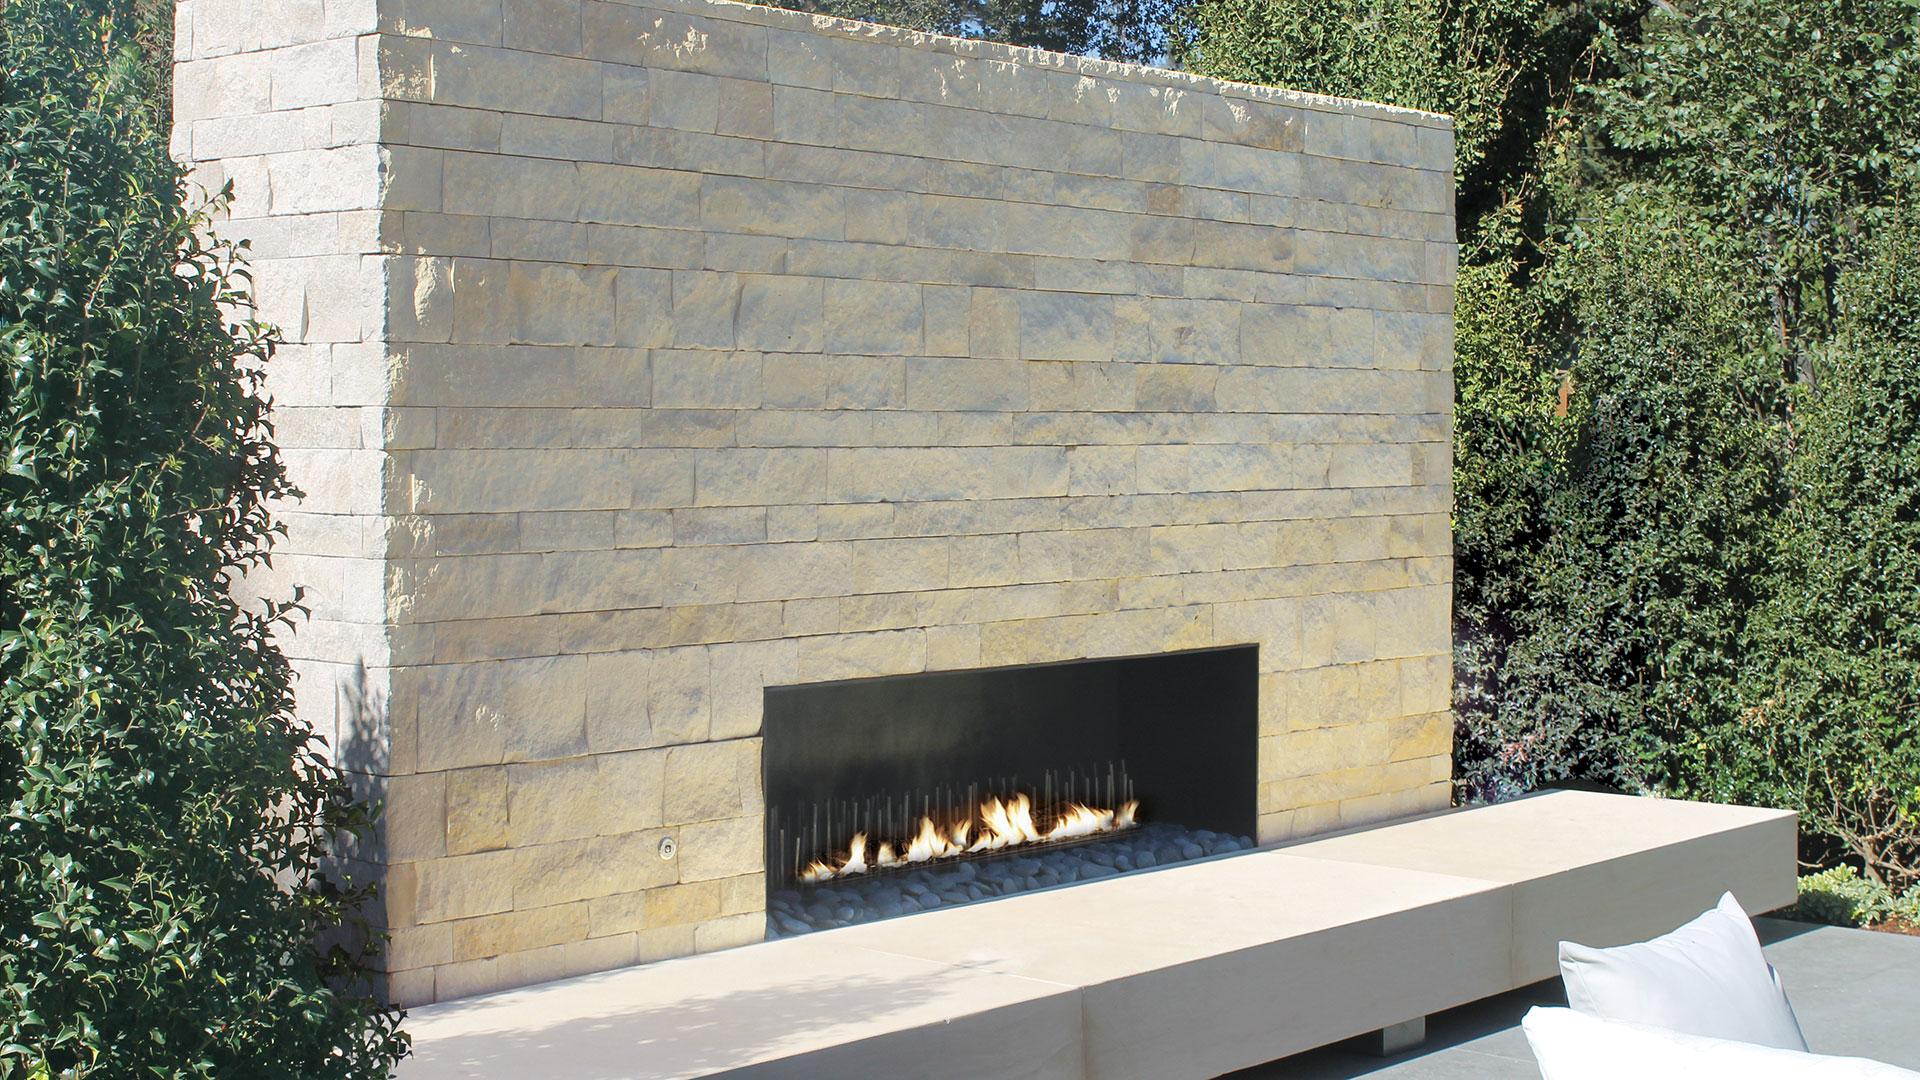 Nadia Pillowed Ledge natural stone thin veneer install on outdoor fireplace